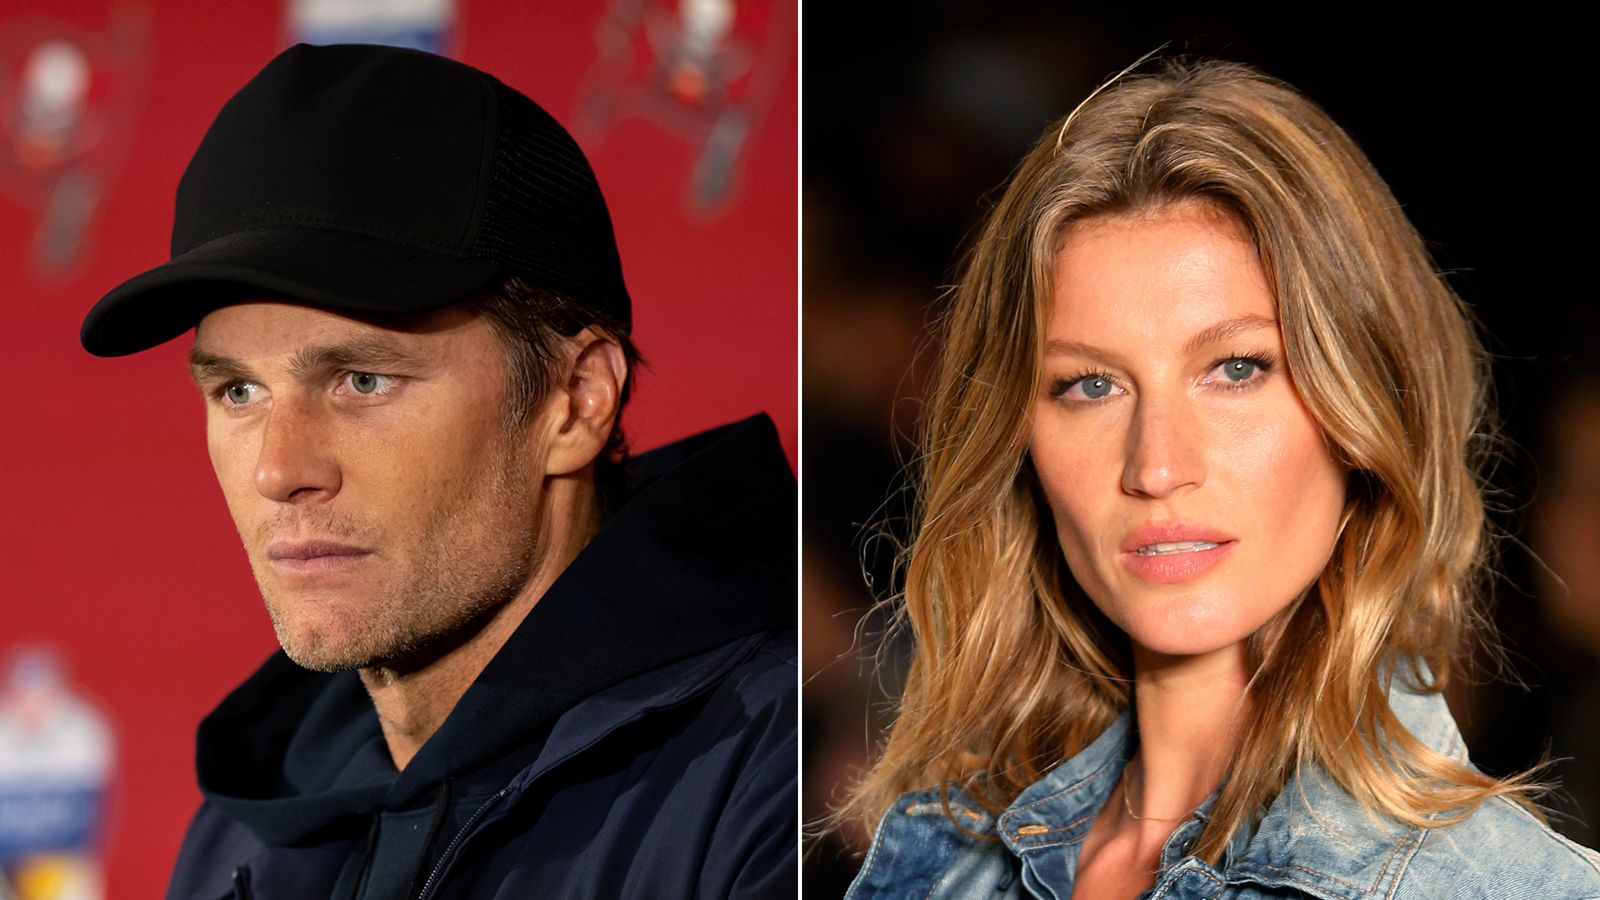 Tom Brady and Gisele Bundchen's FTX stake will probably get wiped out